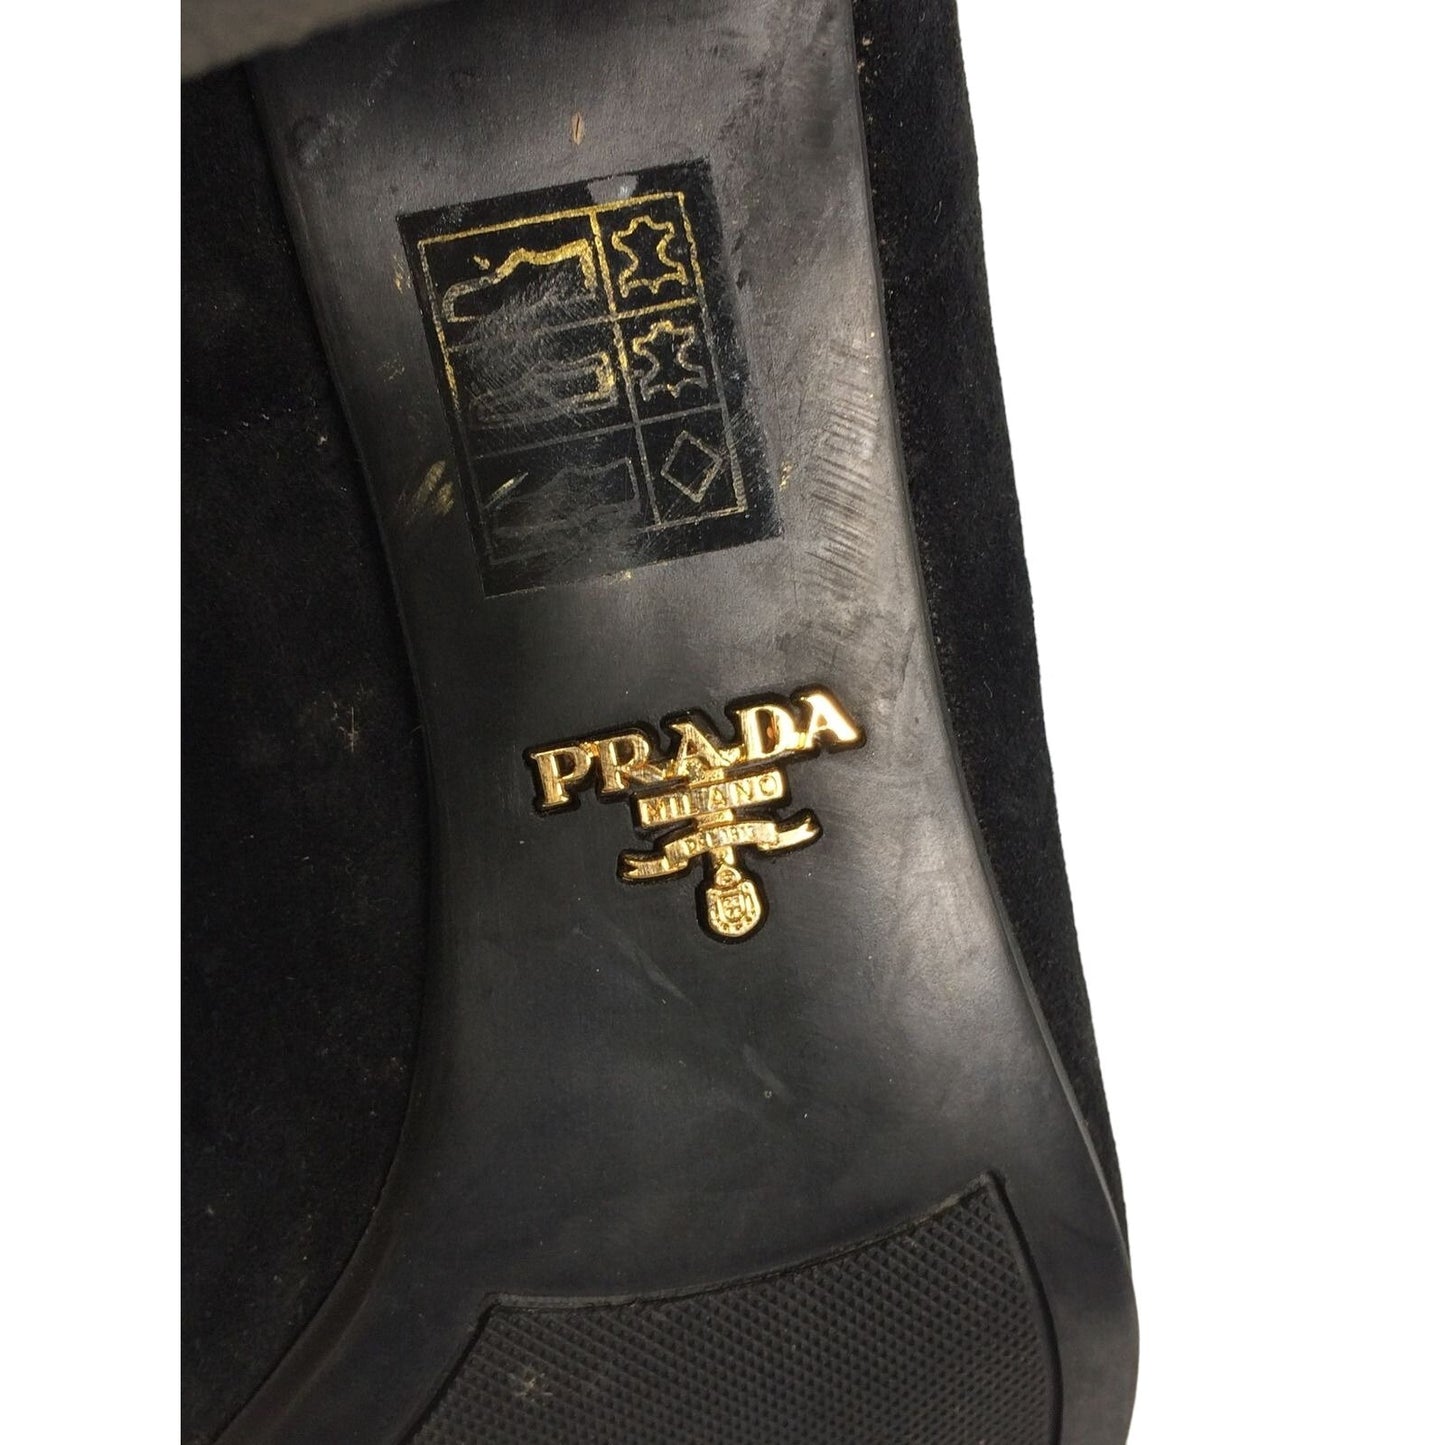 Prada black suede ankle boots